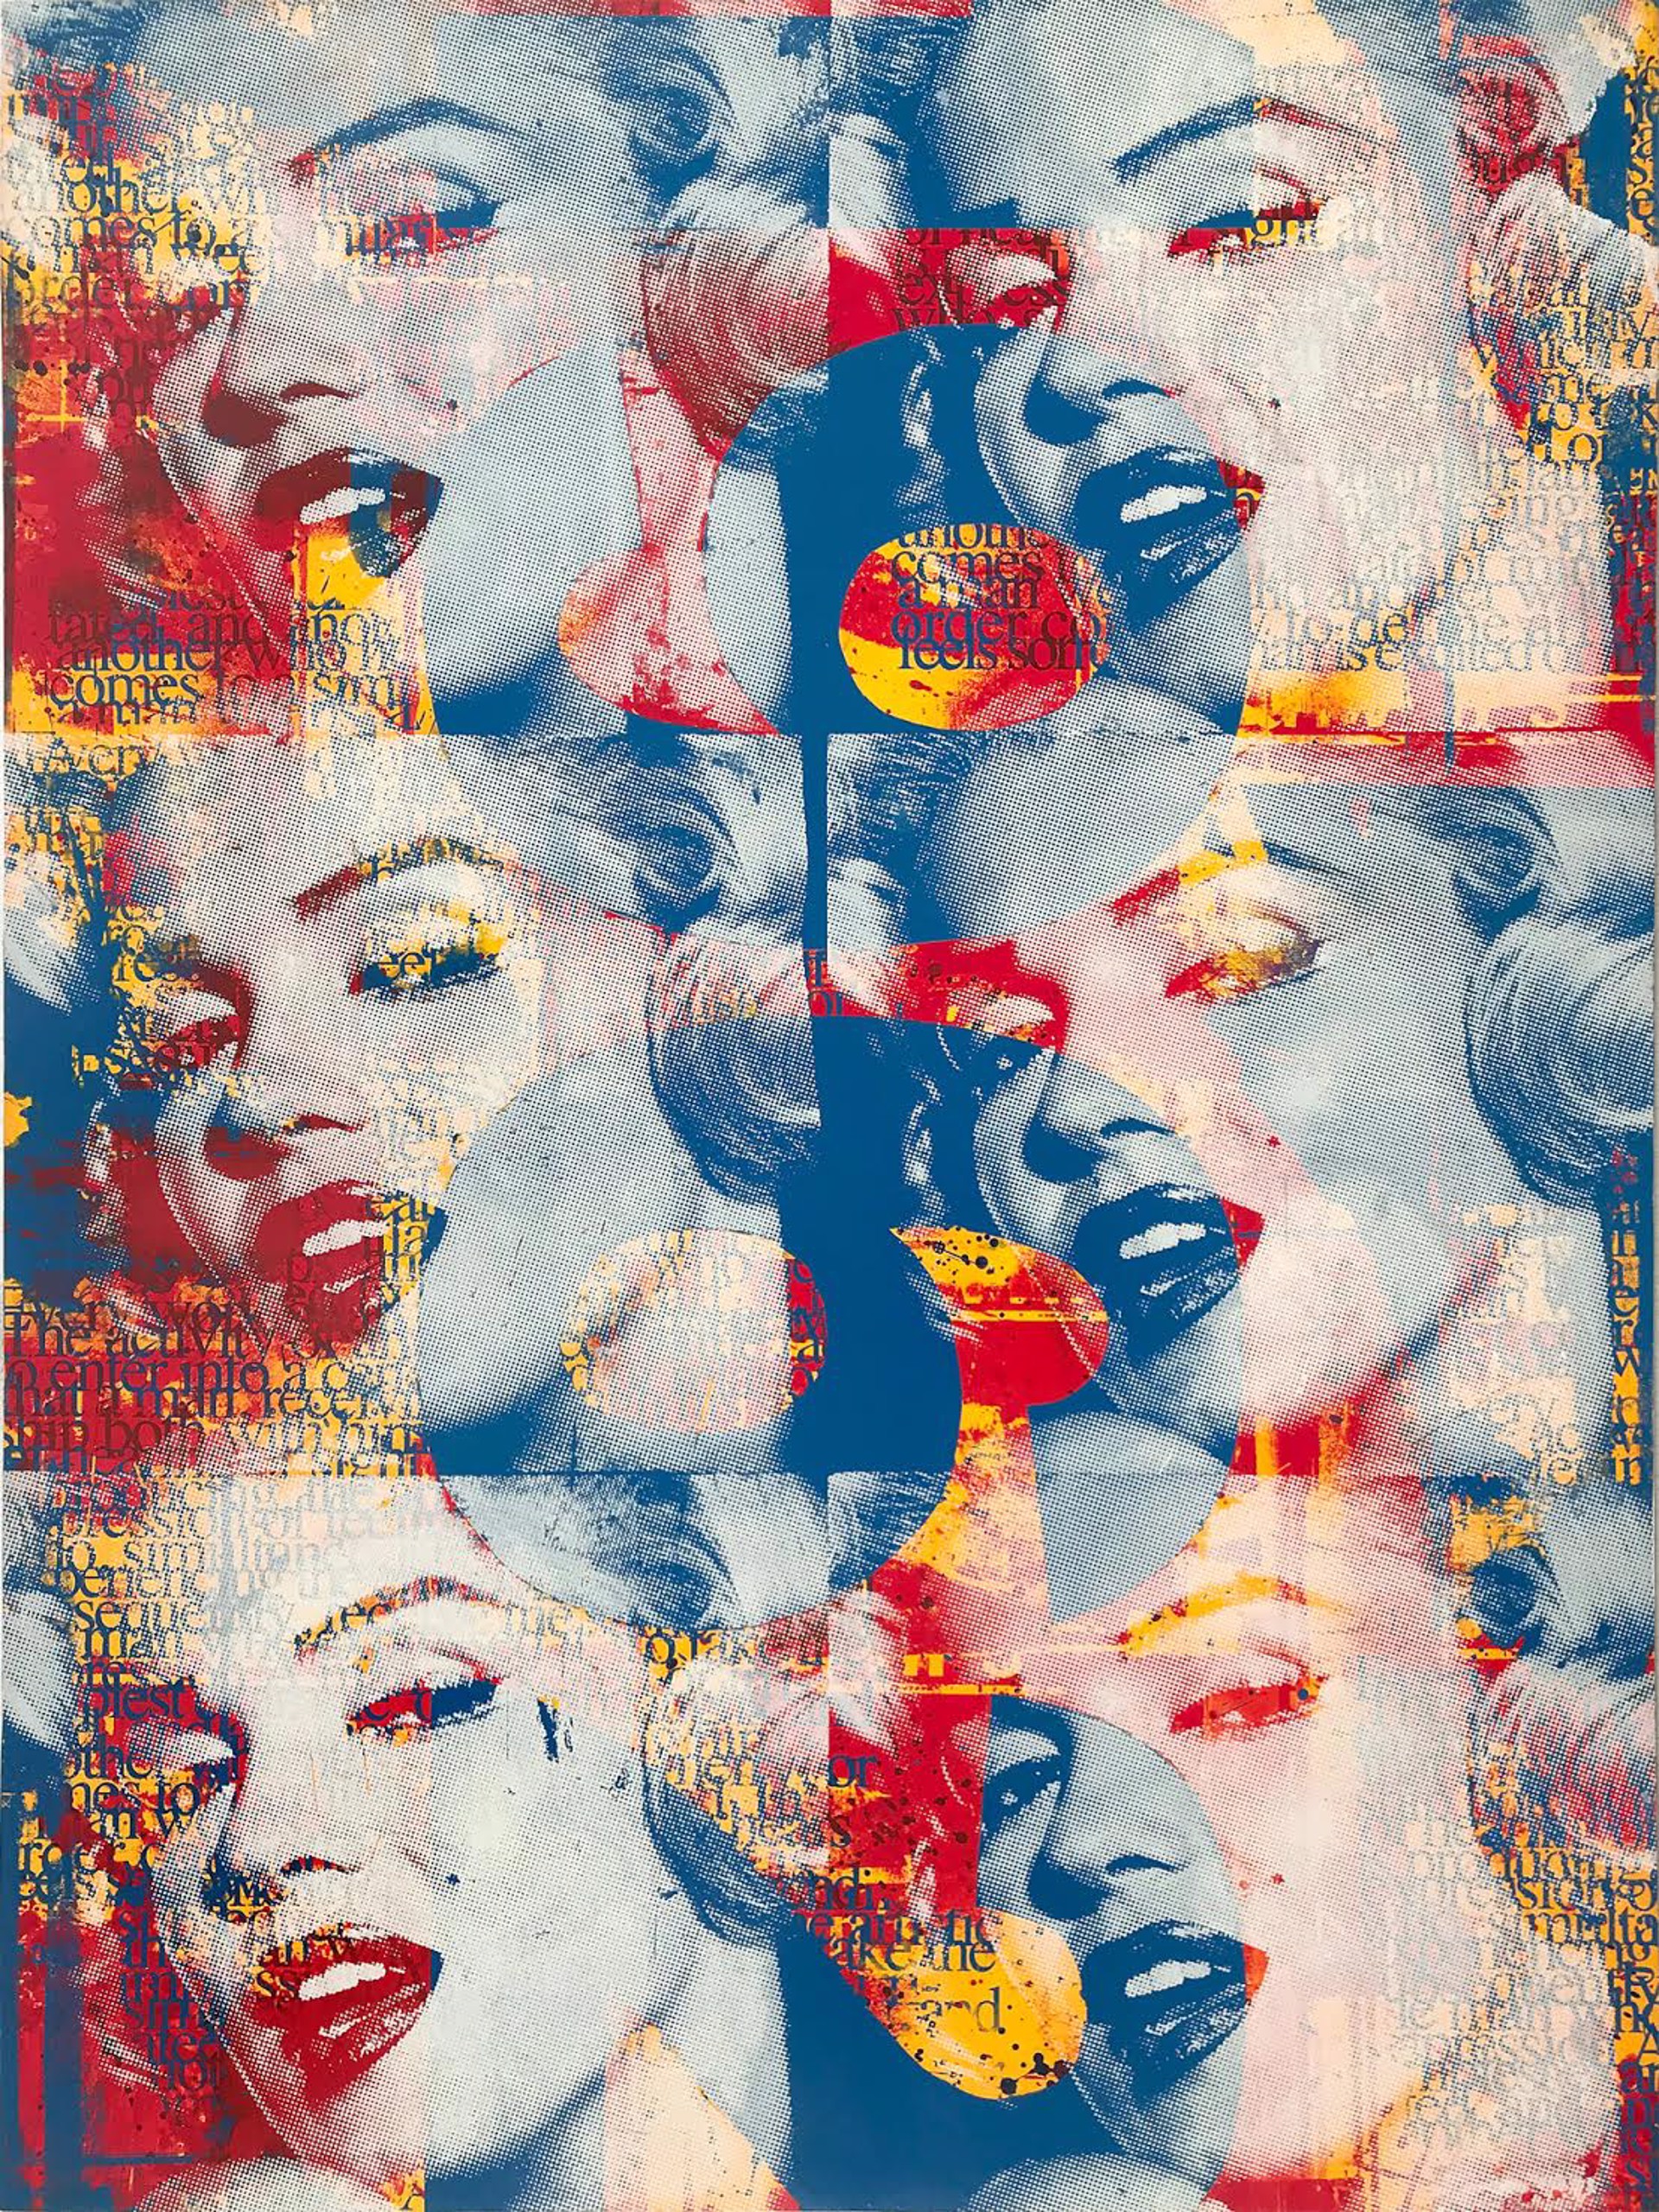 Marilyn 62' by Ray Phillips